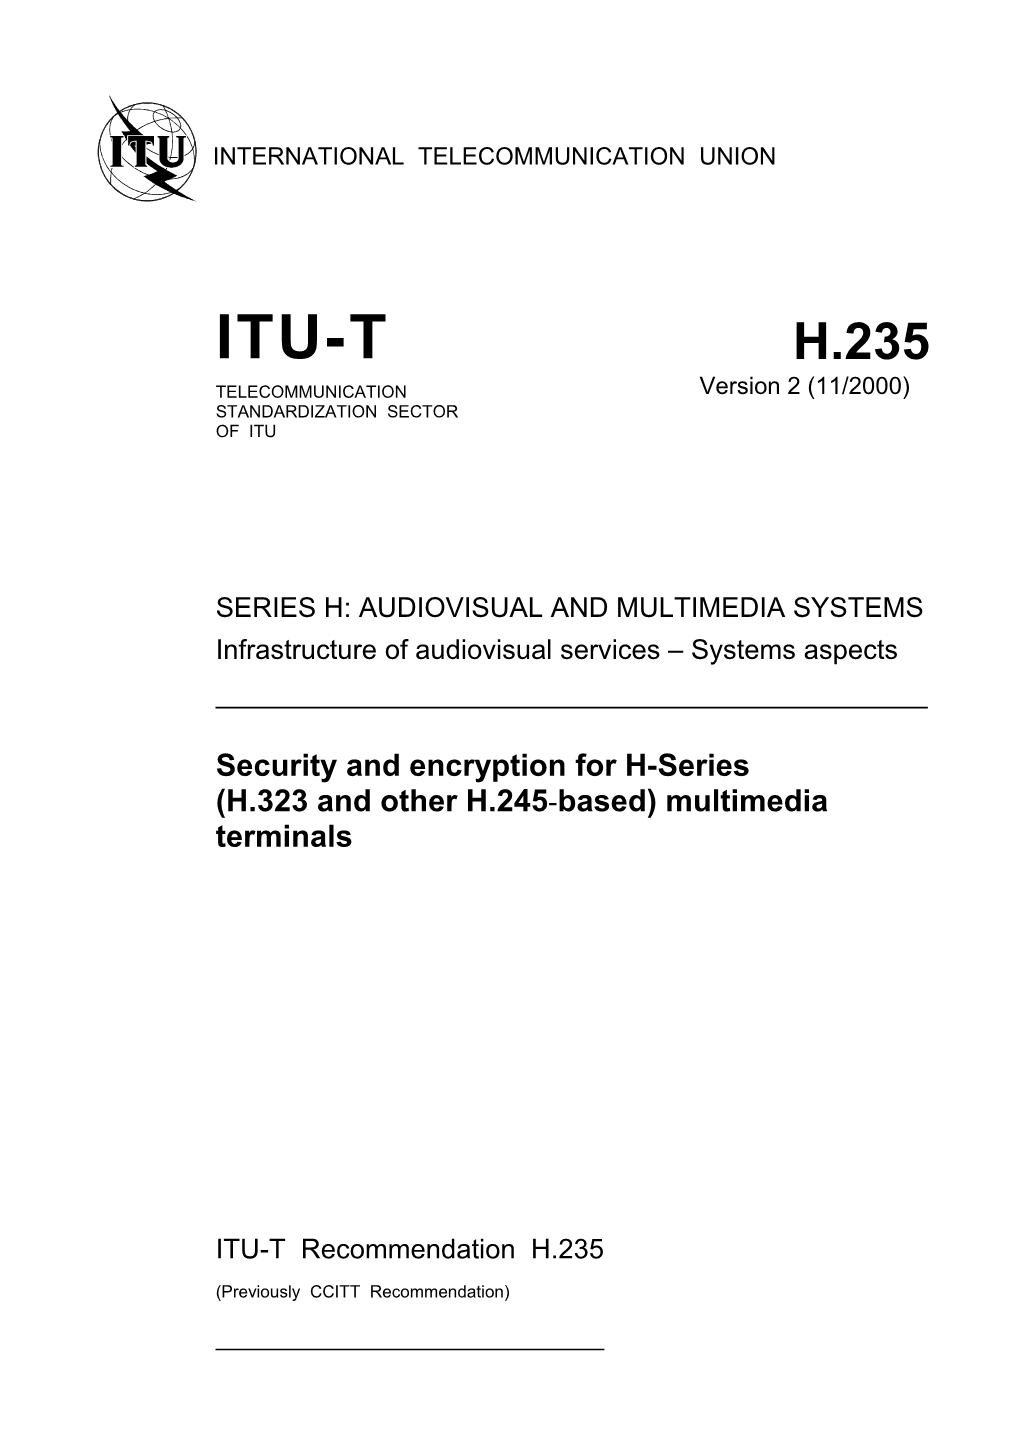 Series H: Audiovisual and Multimedia Systems